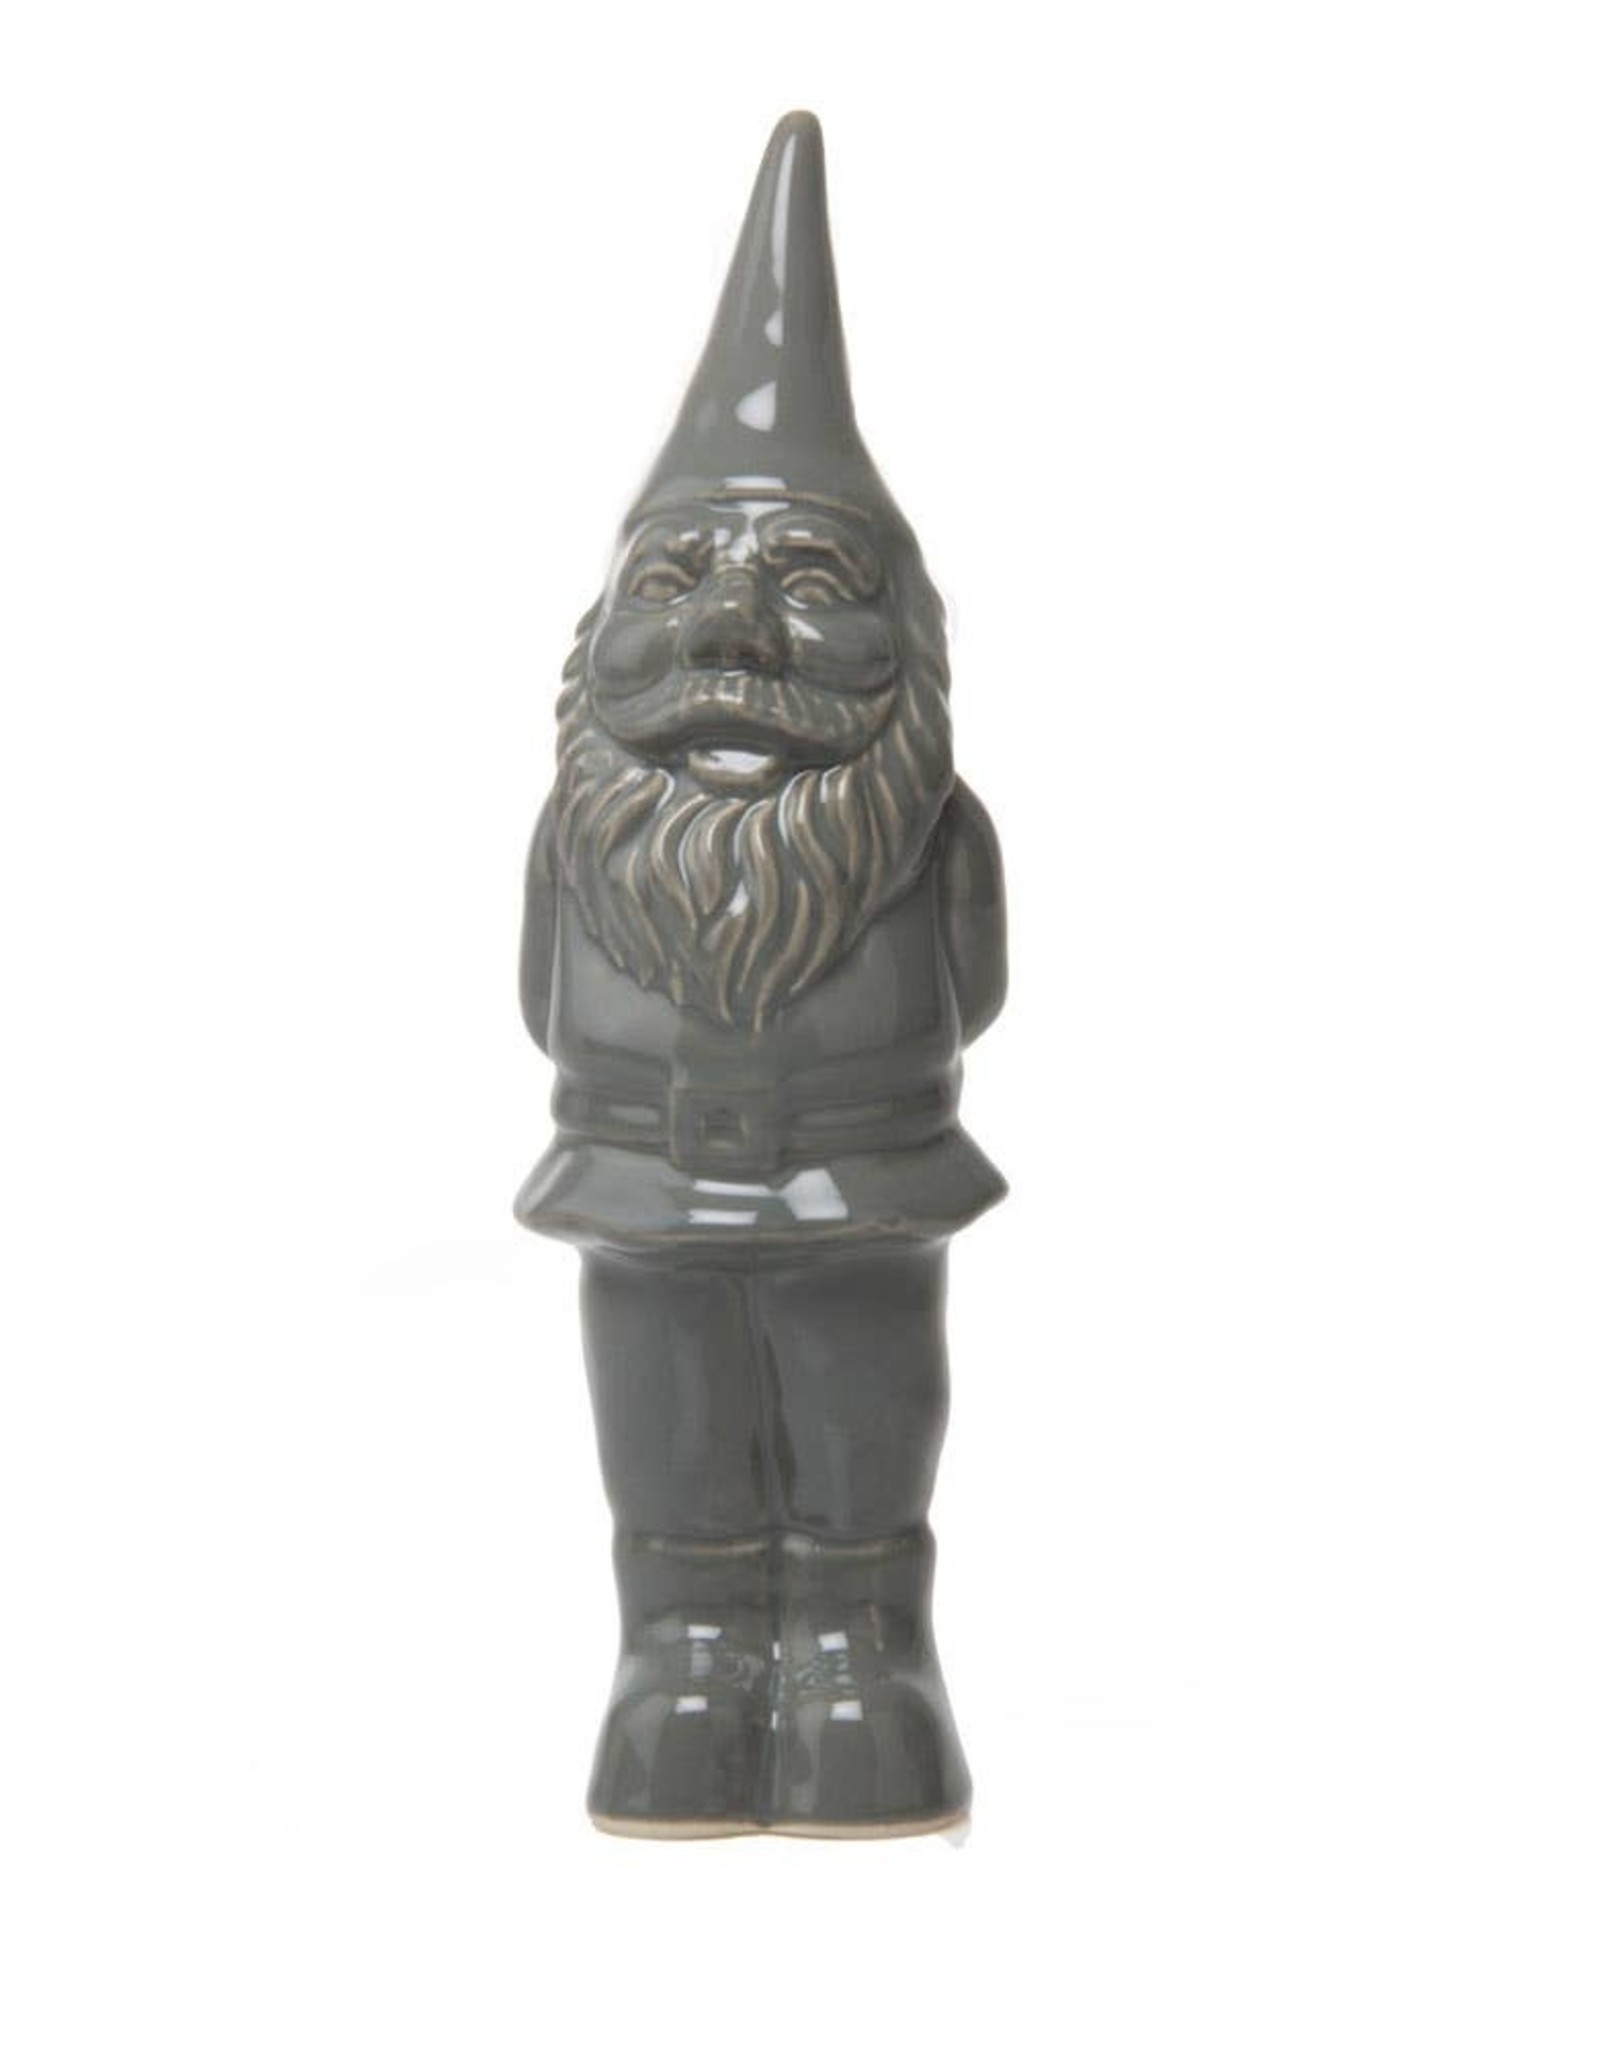 Chive Gnome - Grey